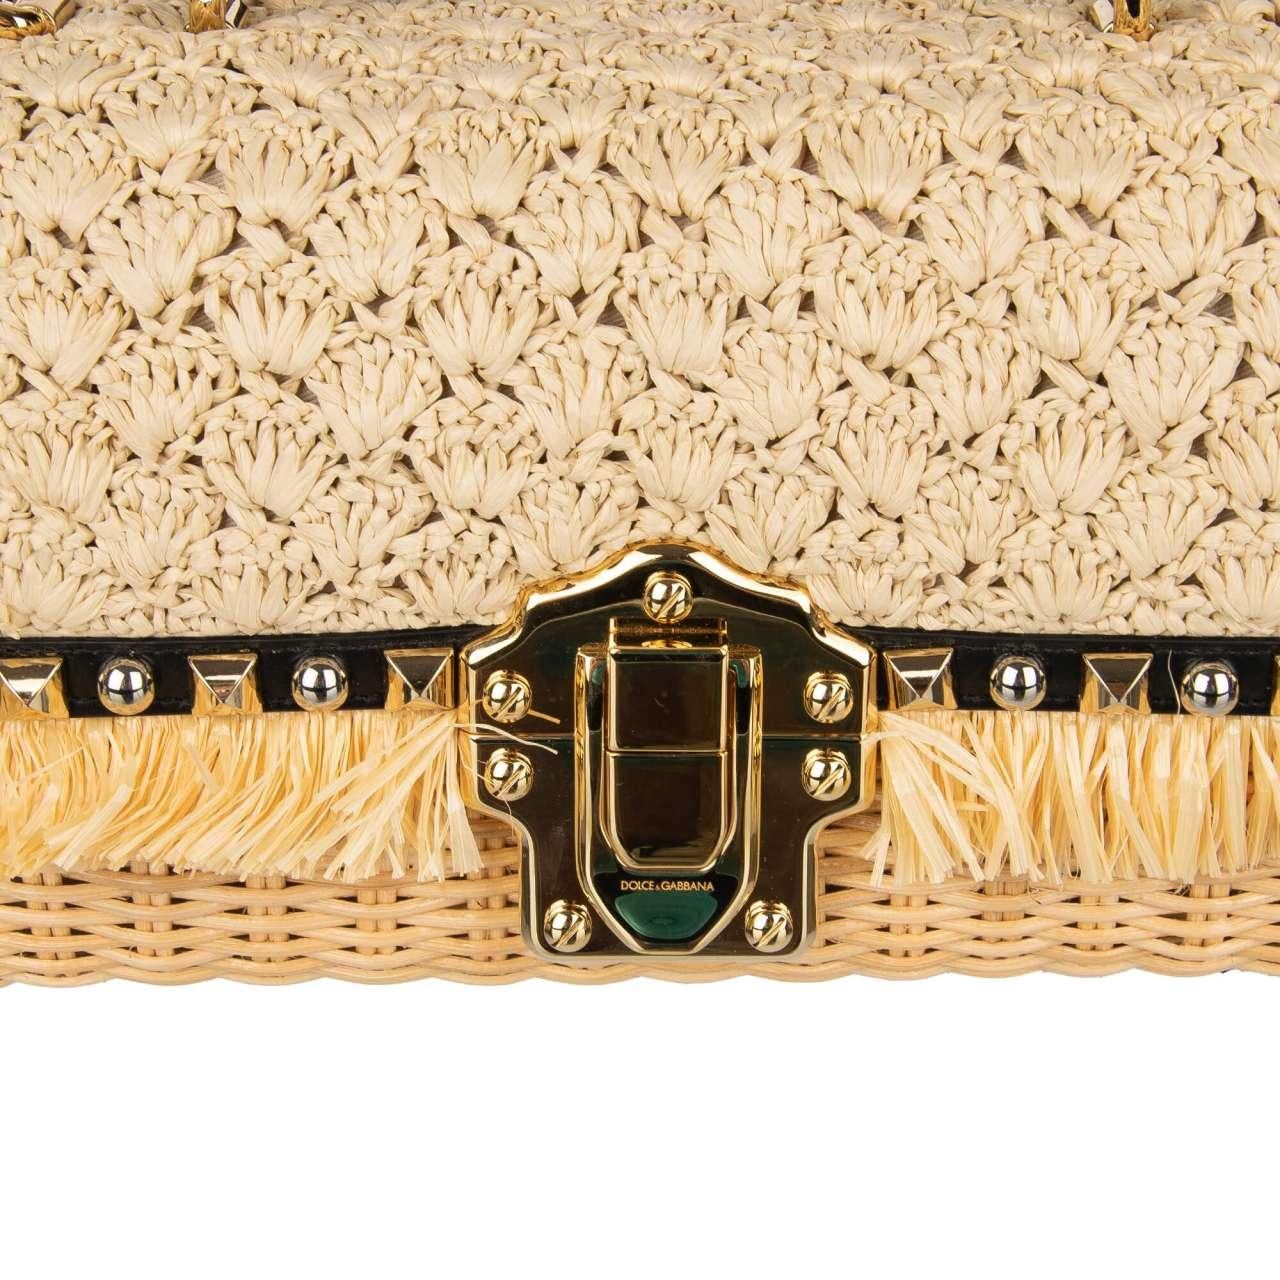 D&G Raffia Straw Shoulder Bag LUCIA with Studs and Dices Handle Beige Black For Sale 4